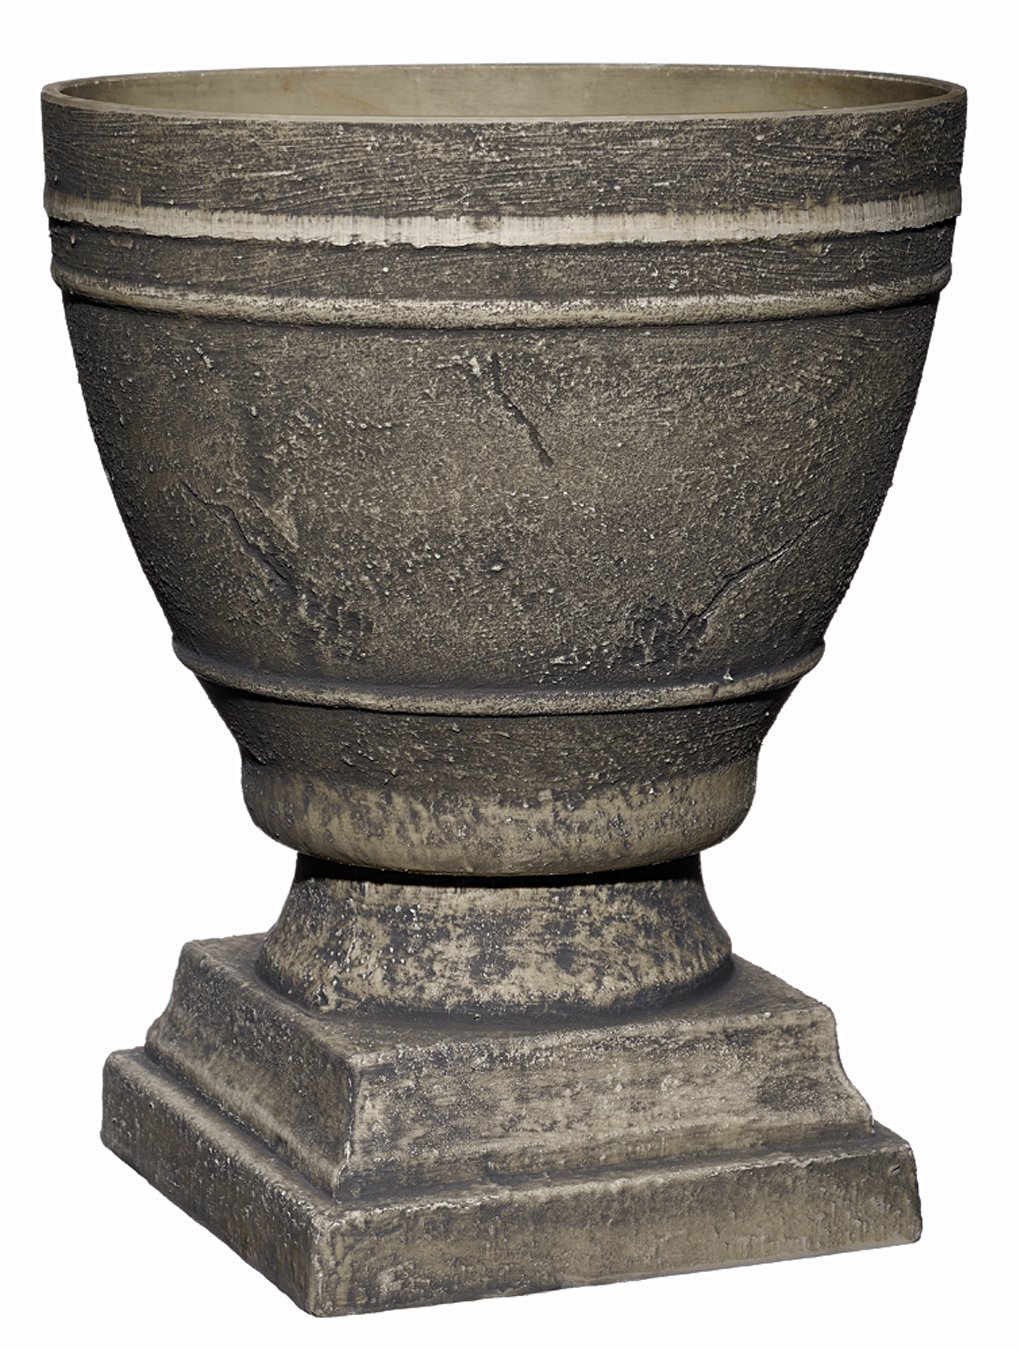 Arcadia Garden Products PL10SL Classic Traditional Plastic Urn Planter Indoor/Outdoor, 15" x 13", Brushed Silver Brushed Silver 15" x 13" Planter